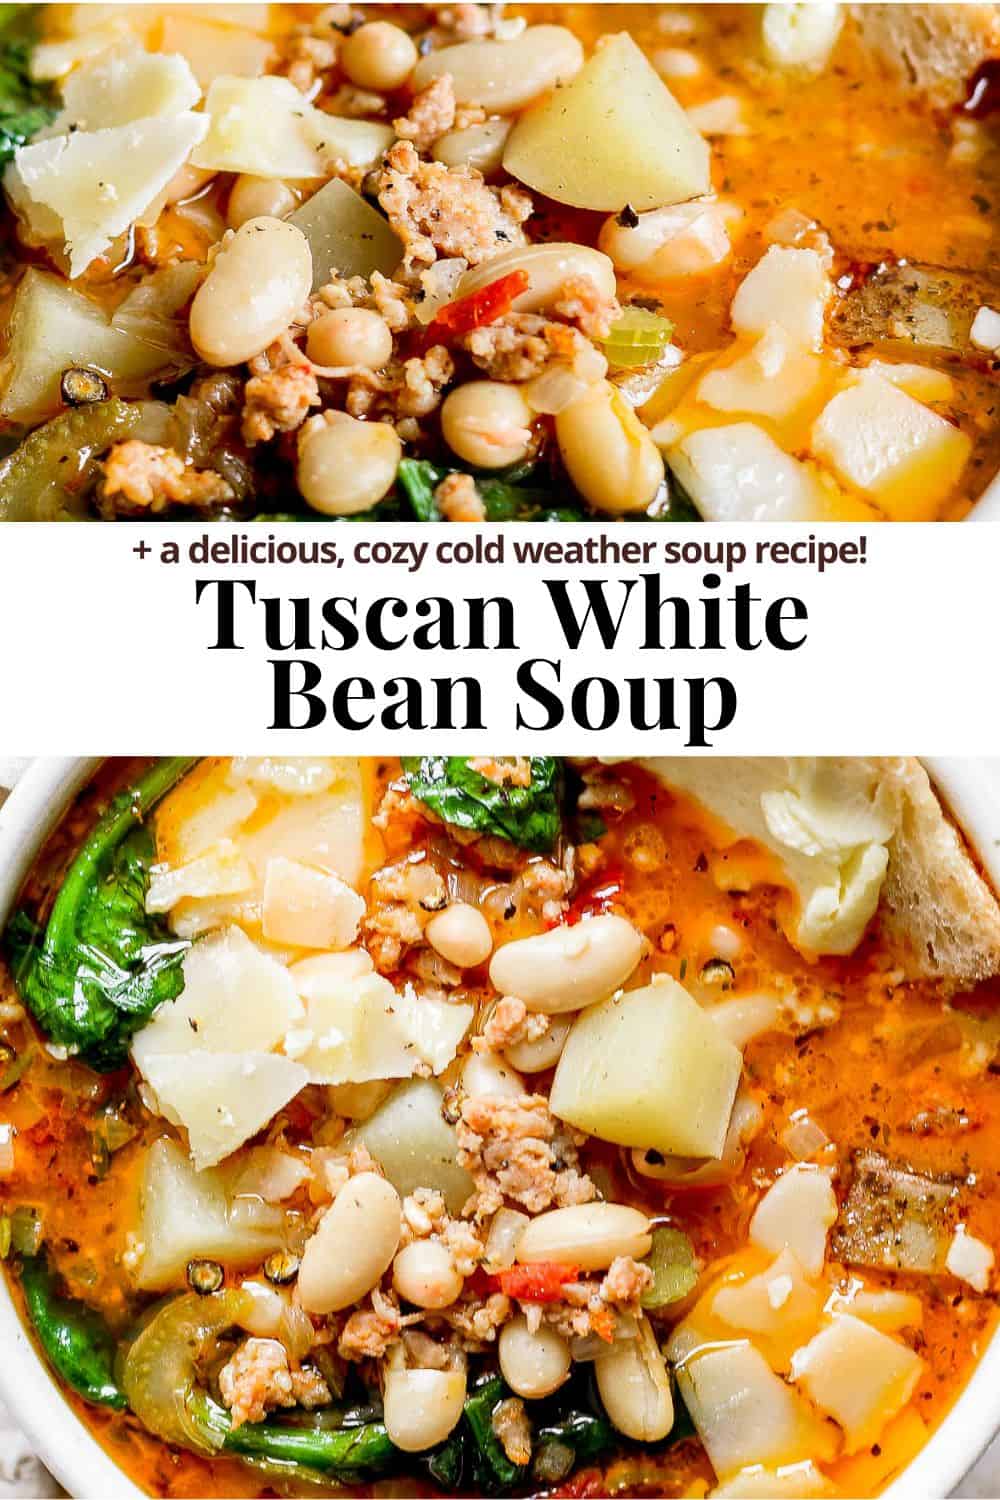 Pinterest image of Tuscan white bean soup in a bowl with the title "Tuscan white bean soup. A delicious, cozy cold weather soup recipe!"